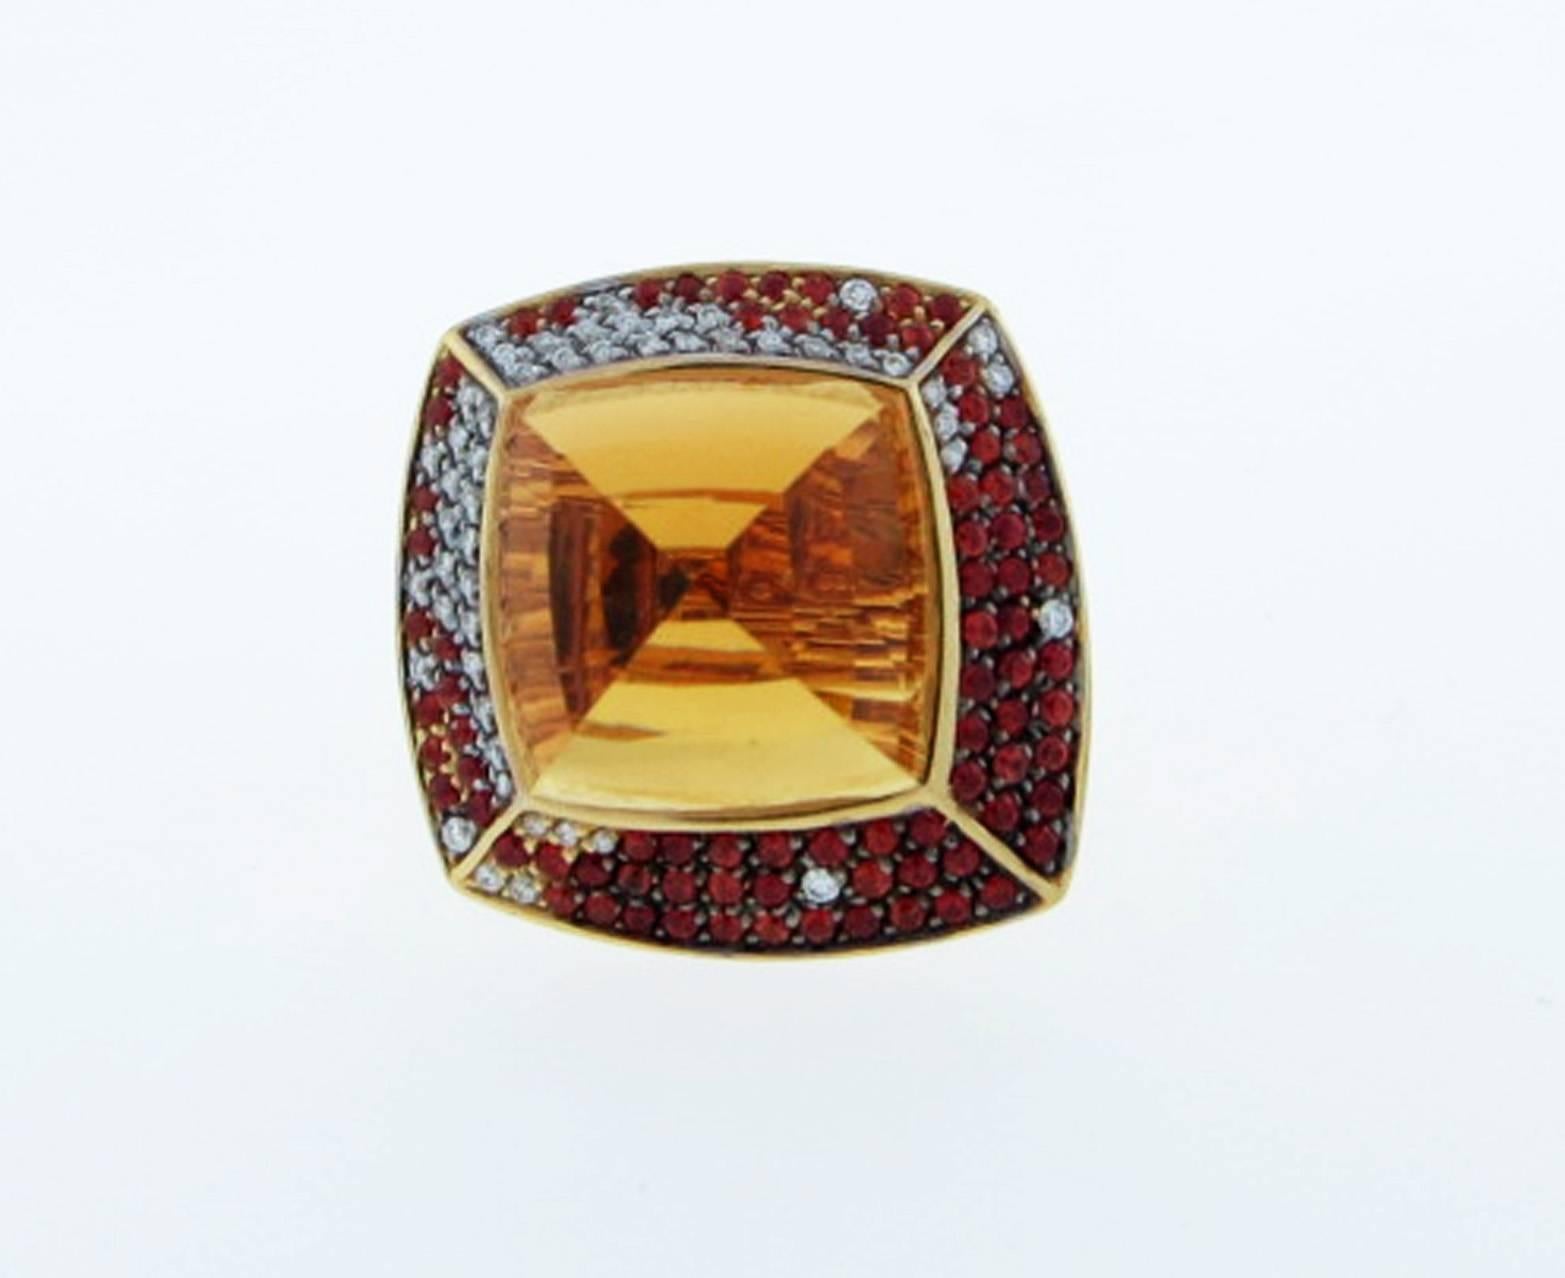 Original and innovative design 18kt. yellow gold ring by the Italian jeweler Valente. The center is set with a pyramid shape faceted citrine weighing approx 
 16.0cts. The surrounding asymmetrical mount is bead set with a mix of round brilliant cut